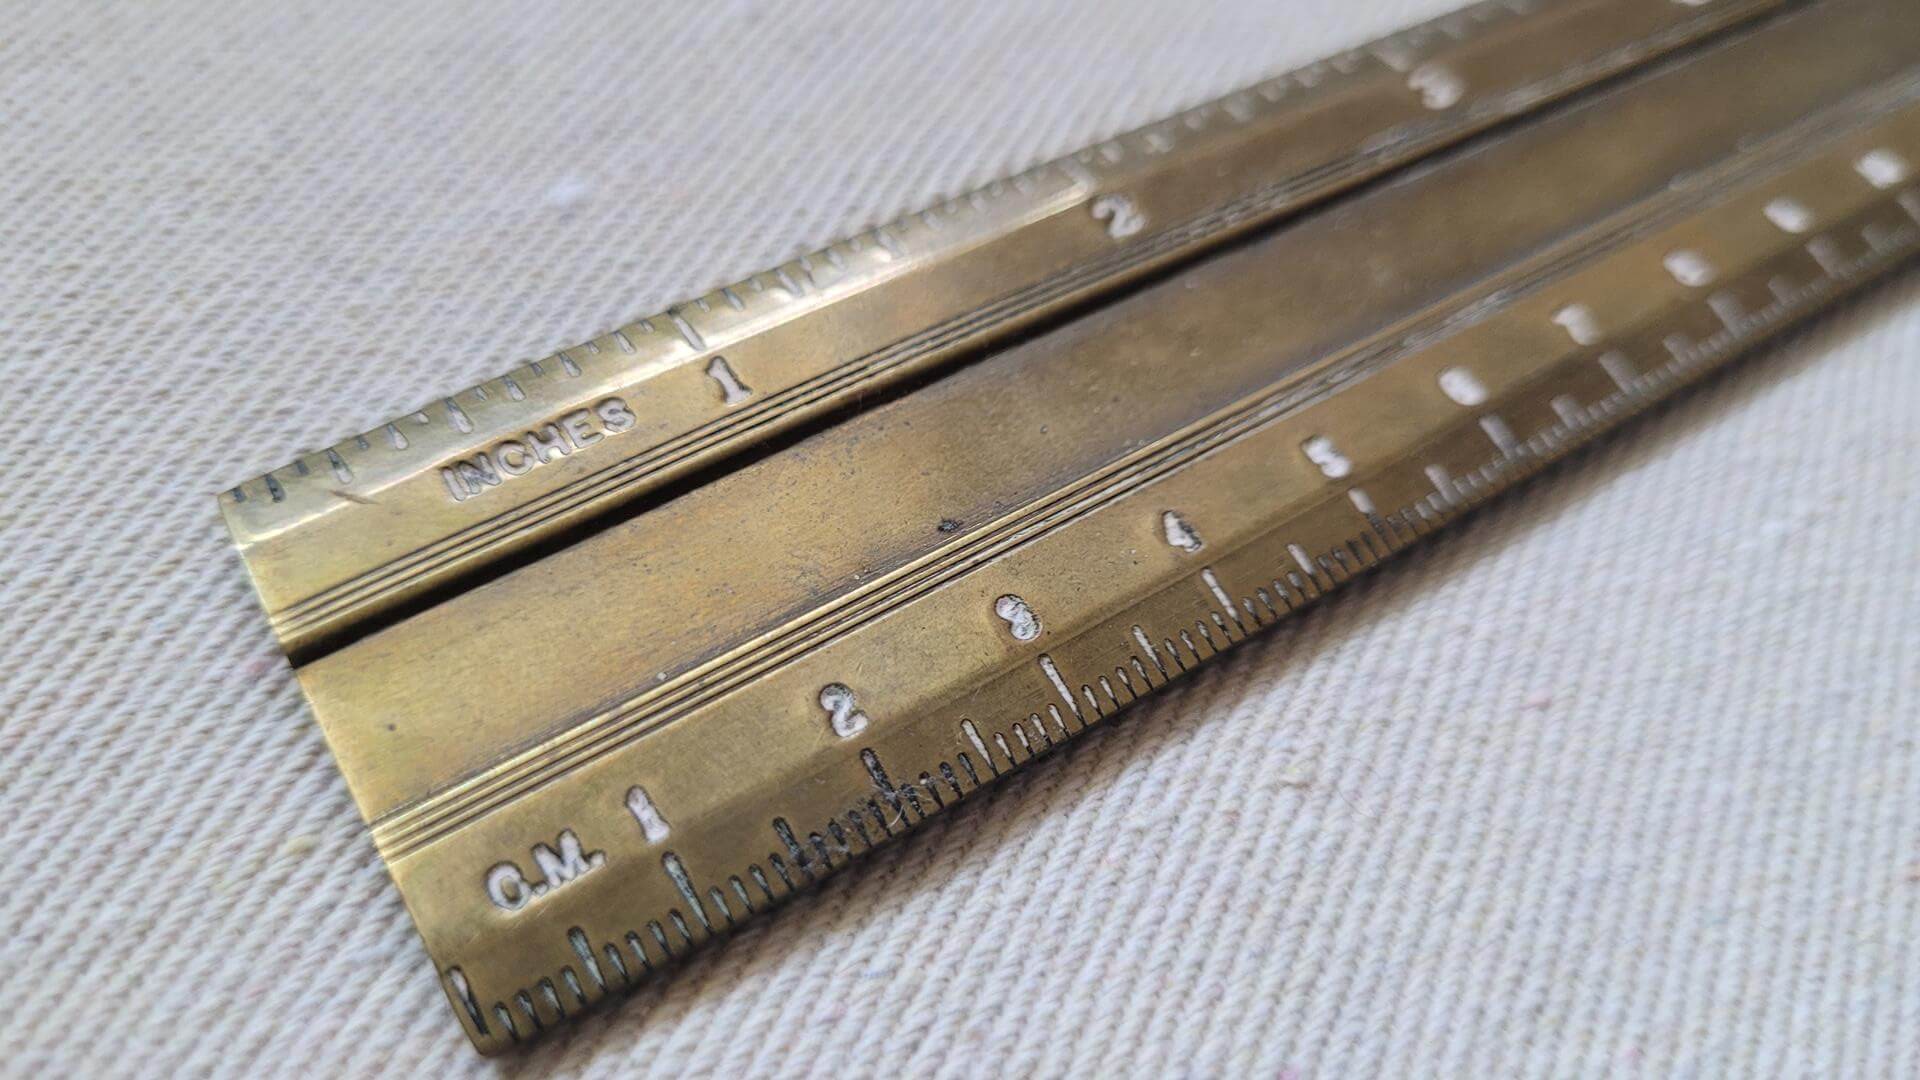 Vintage Twelve Inches Brass Ruler with White Etched Imperial & Metric Units - Antique Collectible Office Equipment and Marking & Measuring Tools